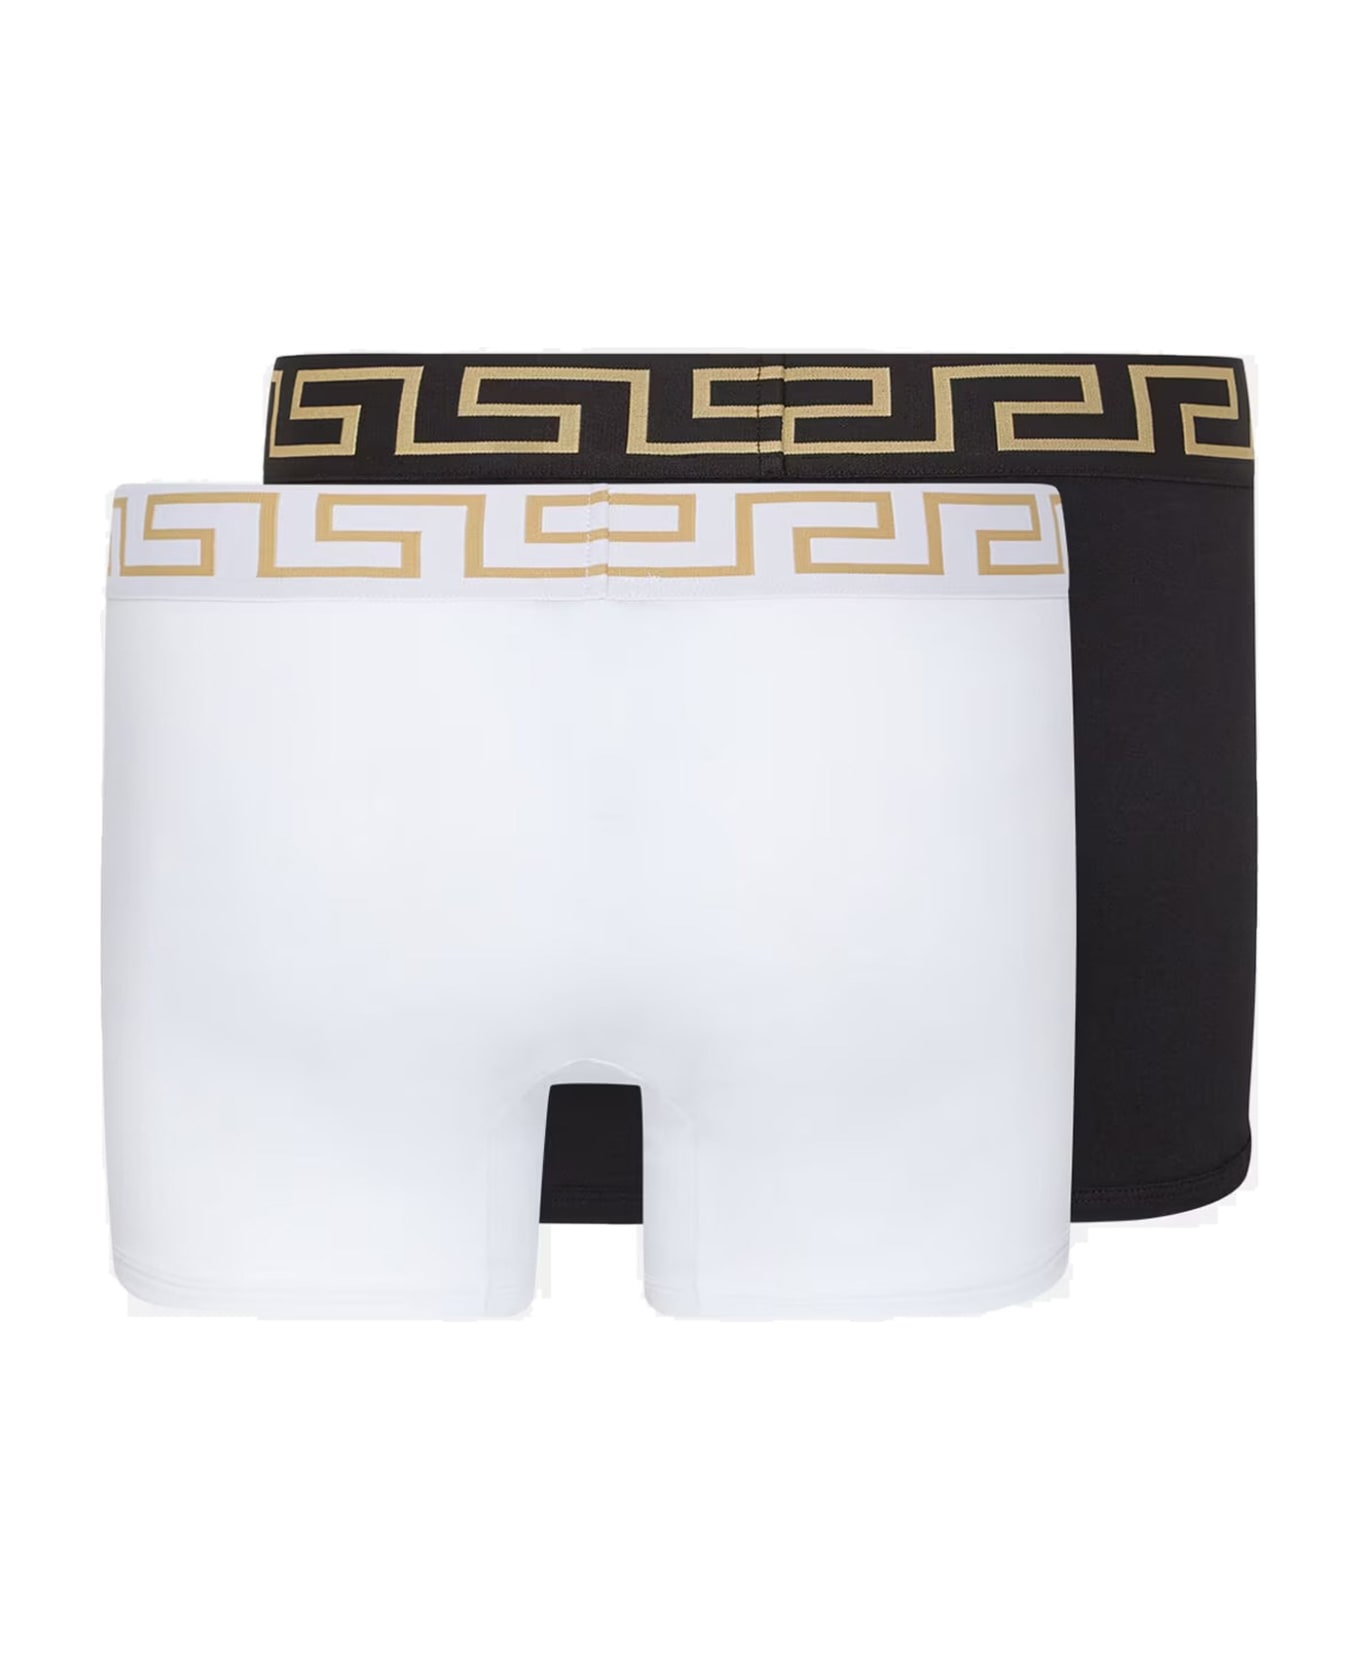 Versace Pack Of Two Boxer Shorts With Greek Motif - K Nero Bianco ショーツ